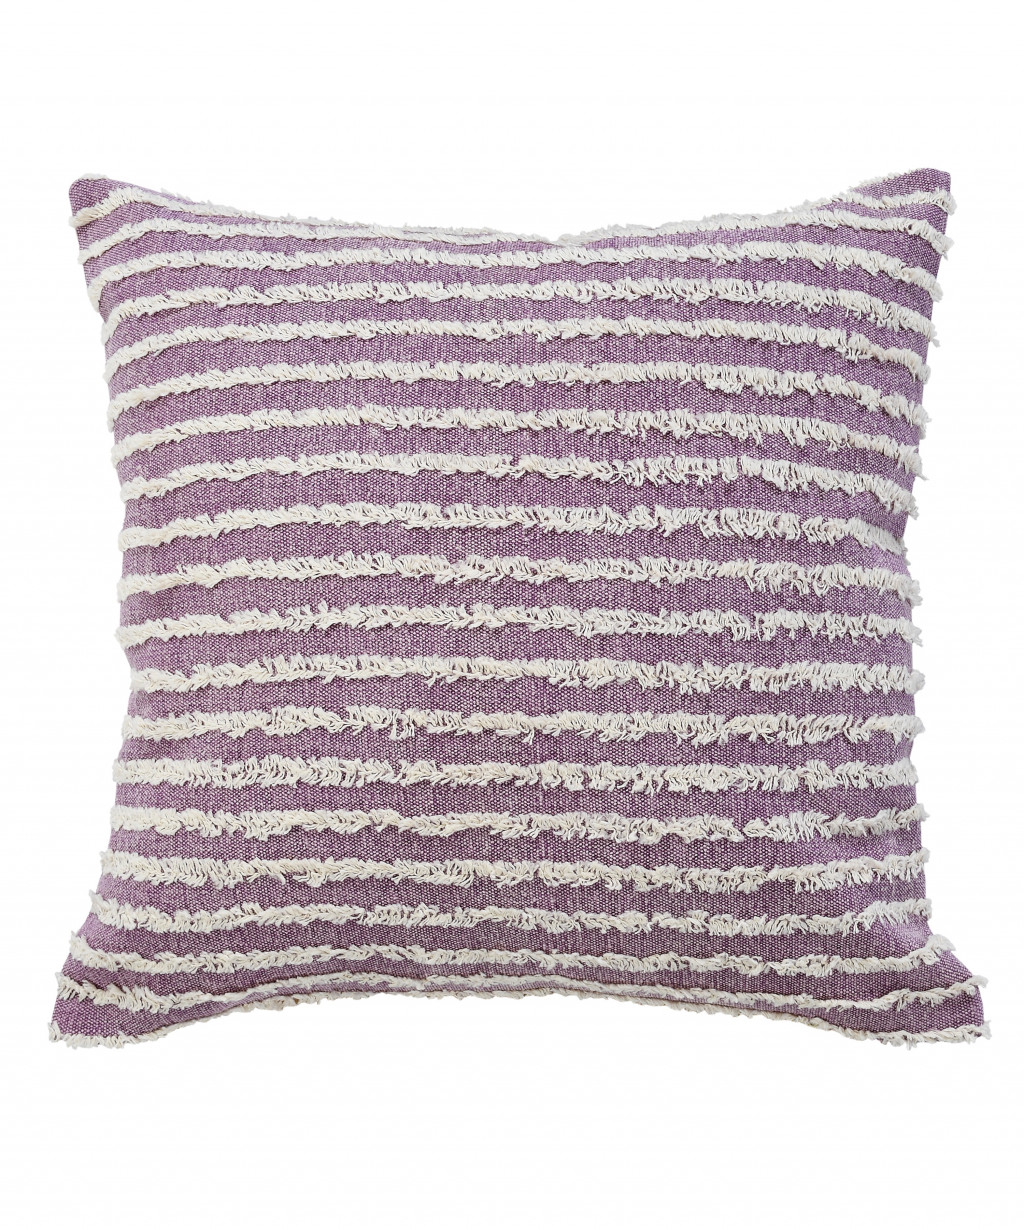 20" X 20" Purple And Cream 100% Cotton Striped Zippered Pillow-517224-1